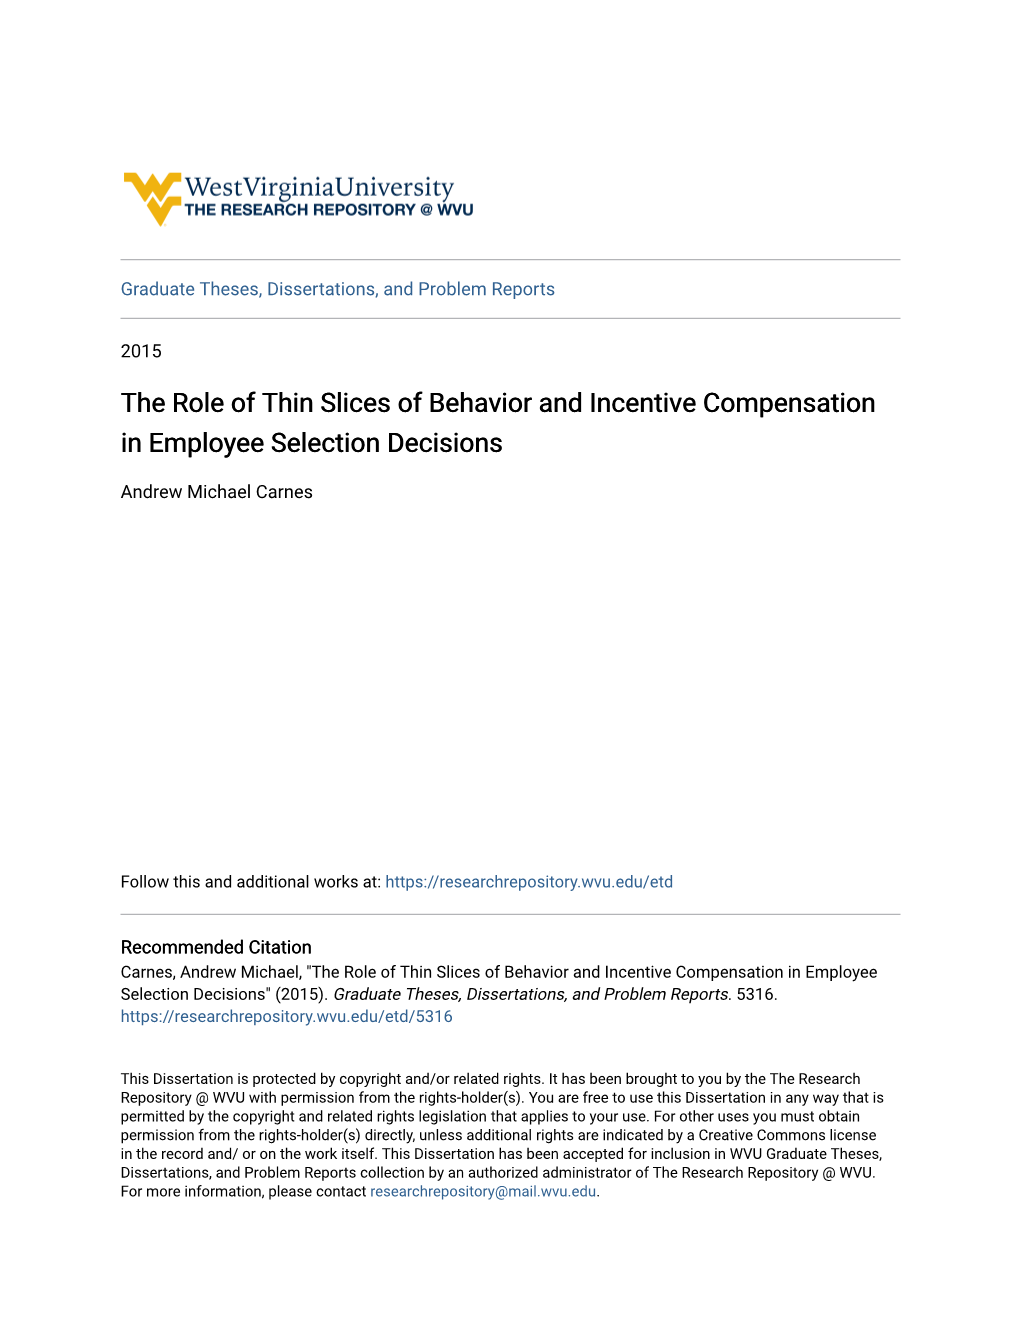 The Role of Thin Slices of Behavior and Incentive Compensation in Employee Selection Decisions